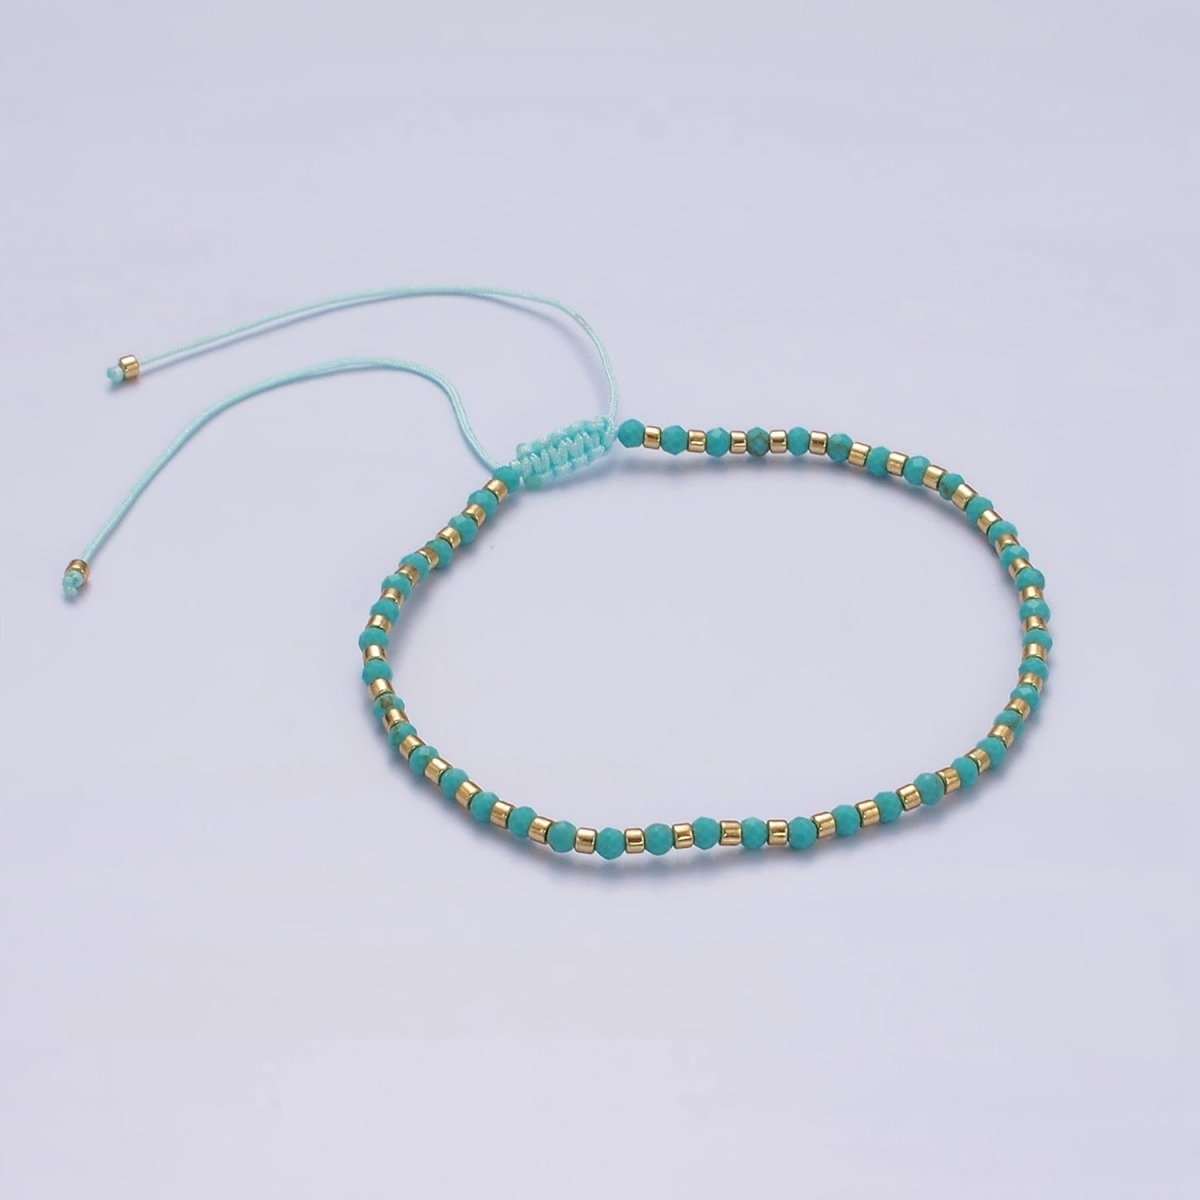 14K Gold Filled Turquoise Multifaceted Turquoise Rope Adjustable Friendship Bracelet | WA-2171 - WA-2219 Clearance Pricing - DLUXCA